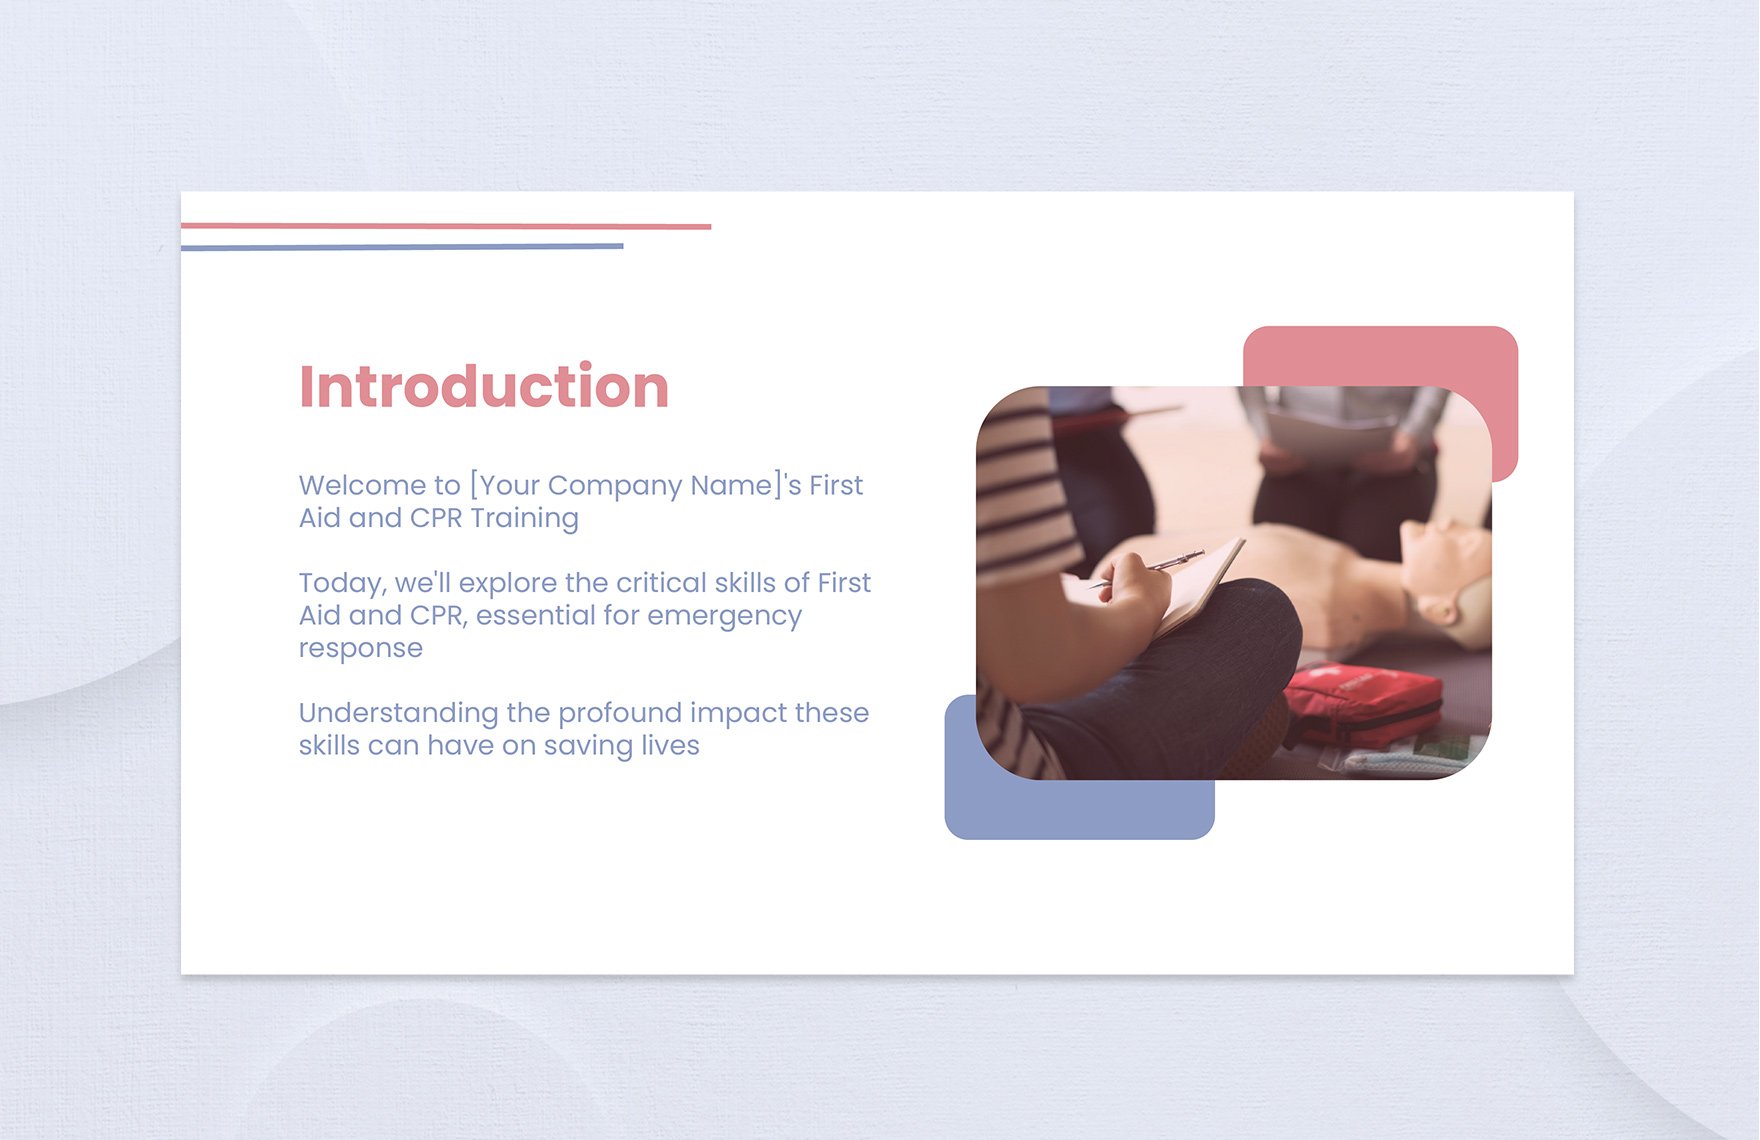 First Aid and CPR Training Presentation Template